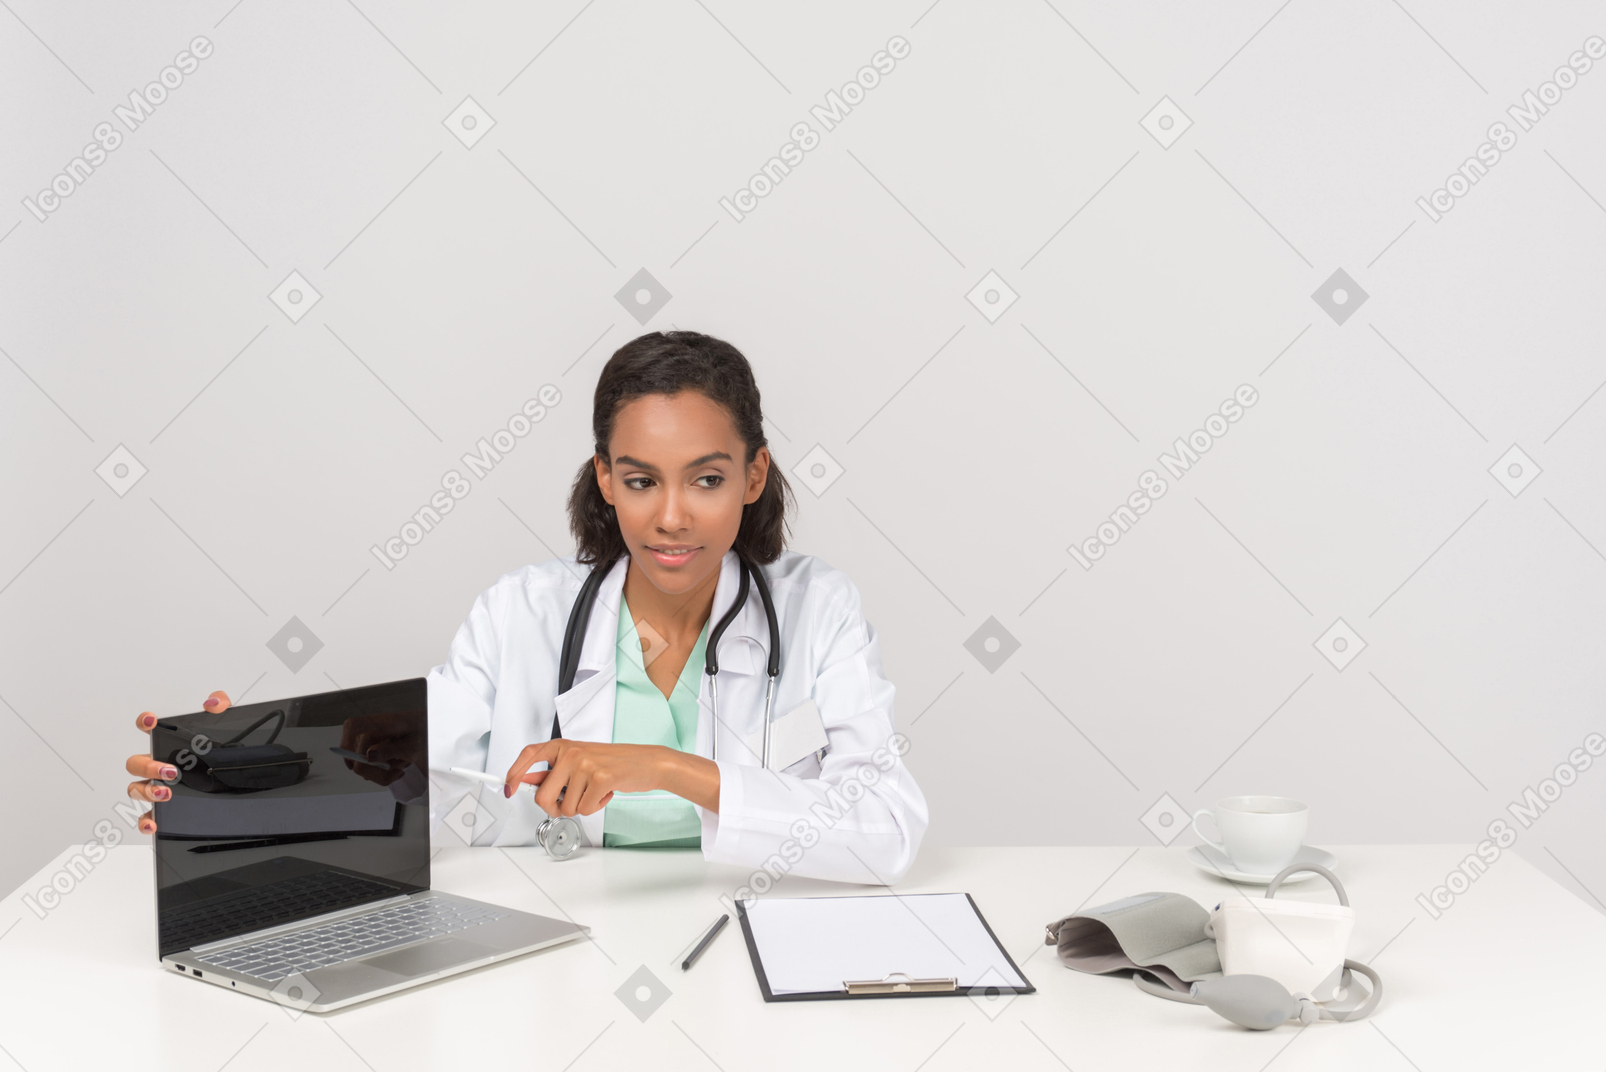 Confident female doctor showing something on her laptop